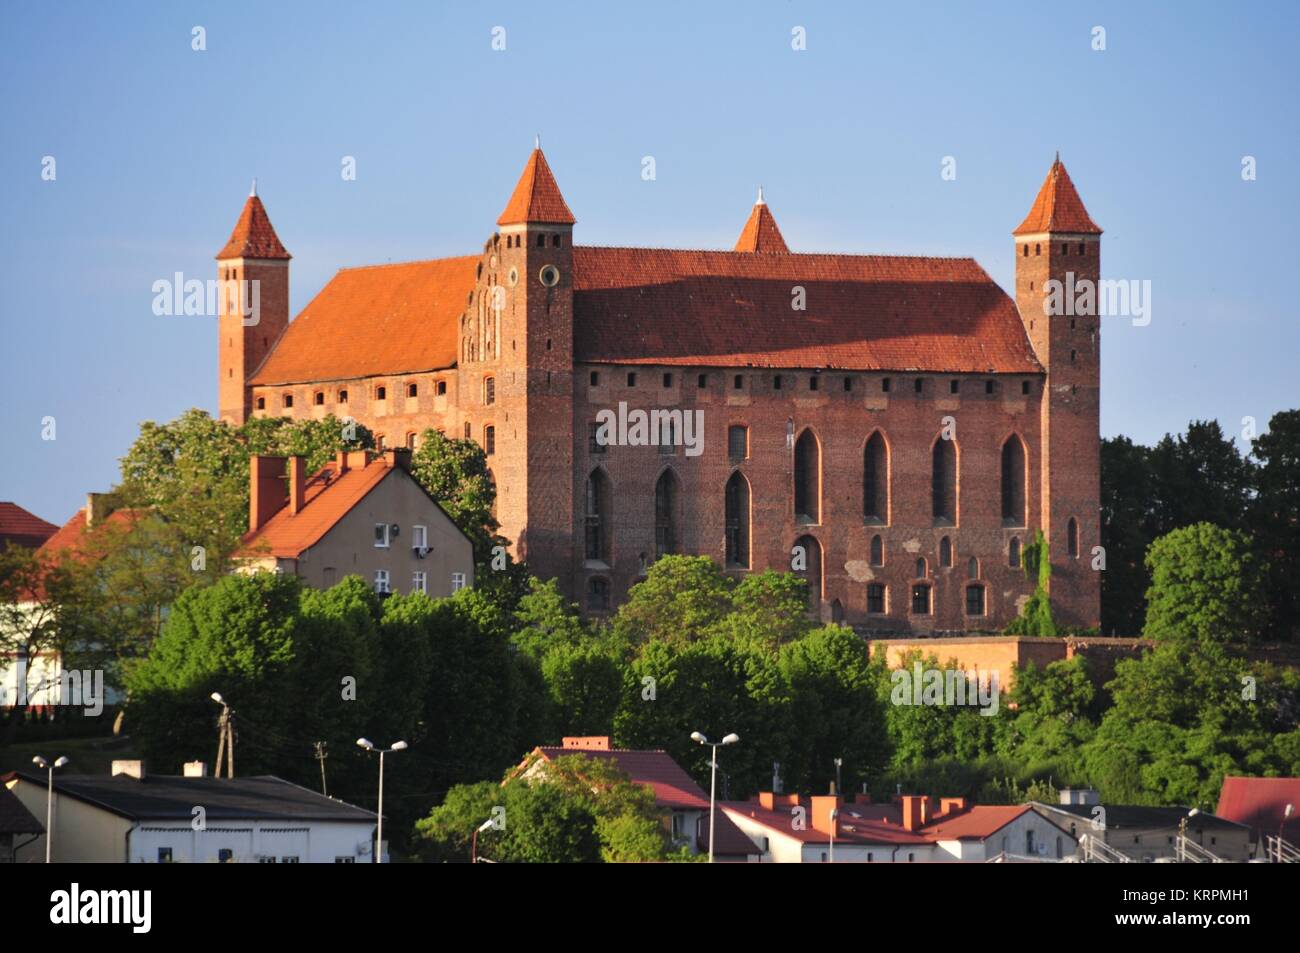 Gniew Castle One Of The Most Recognizable Landmarks In Pomerania Poland Stock Photo Alamy